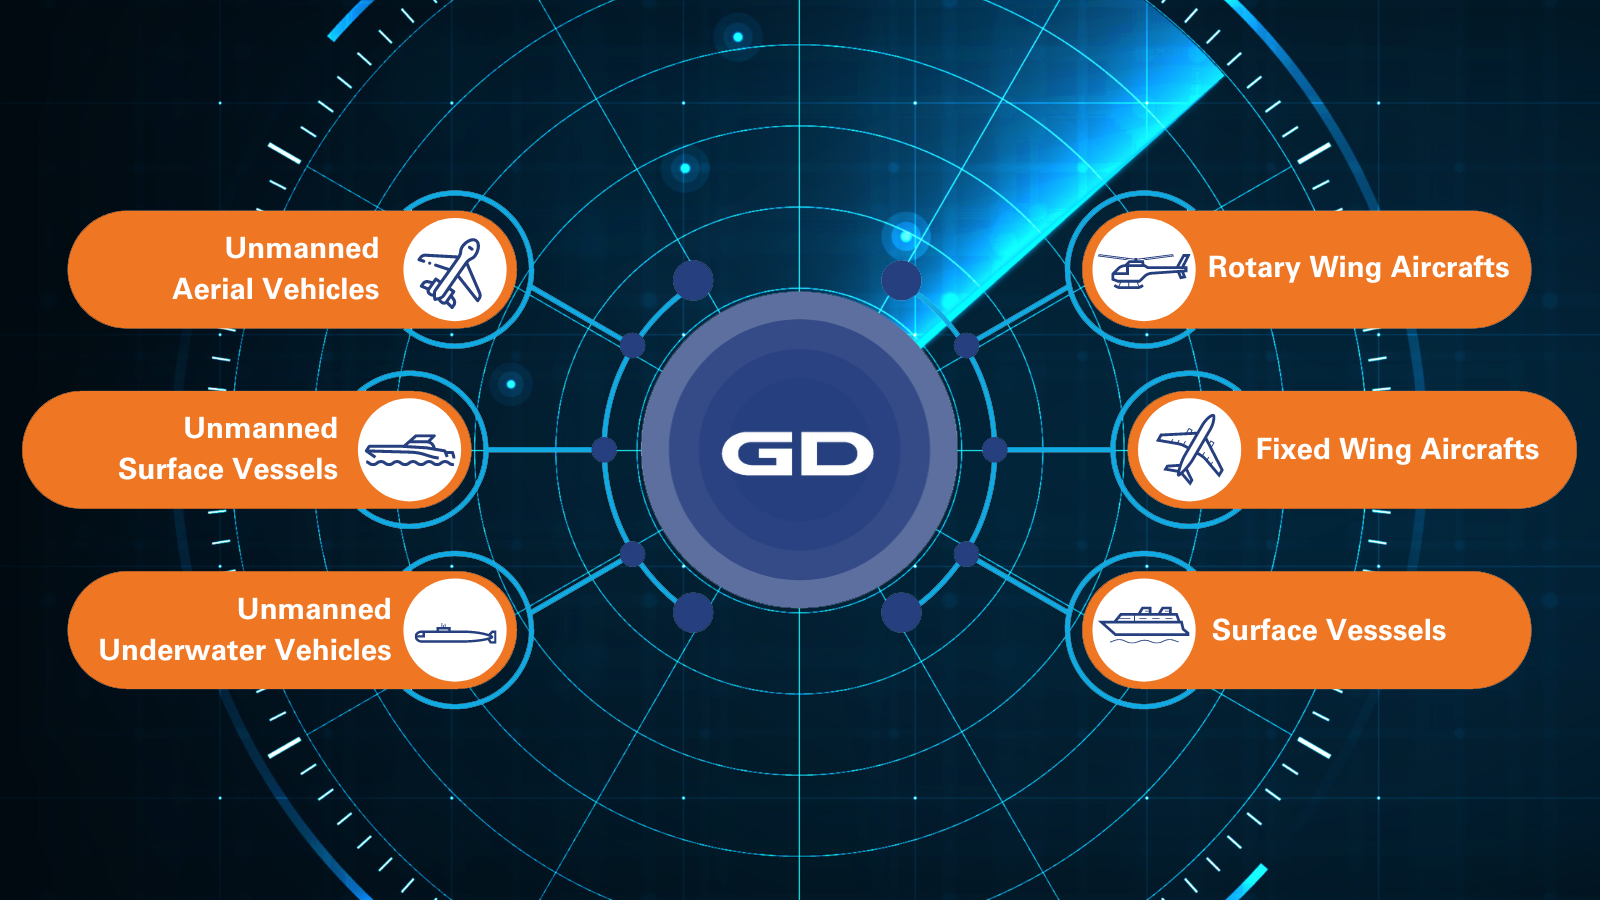 GD logo in the center of diagram pointing to multiple maritime platforms